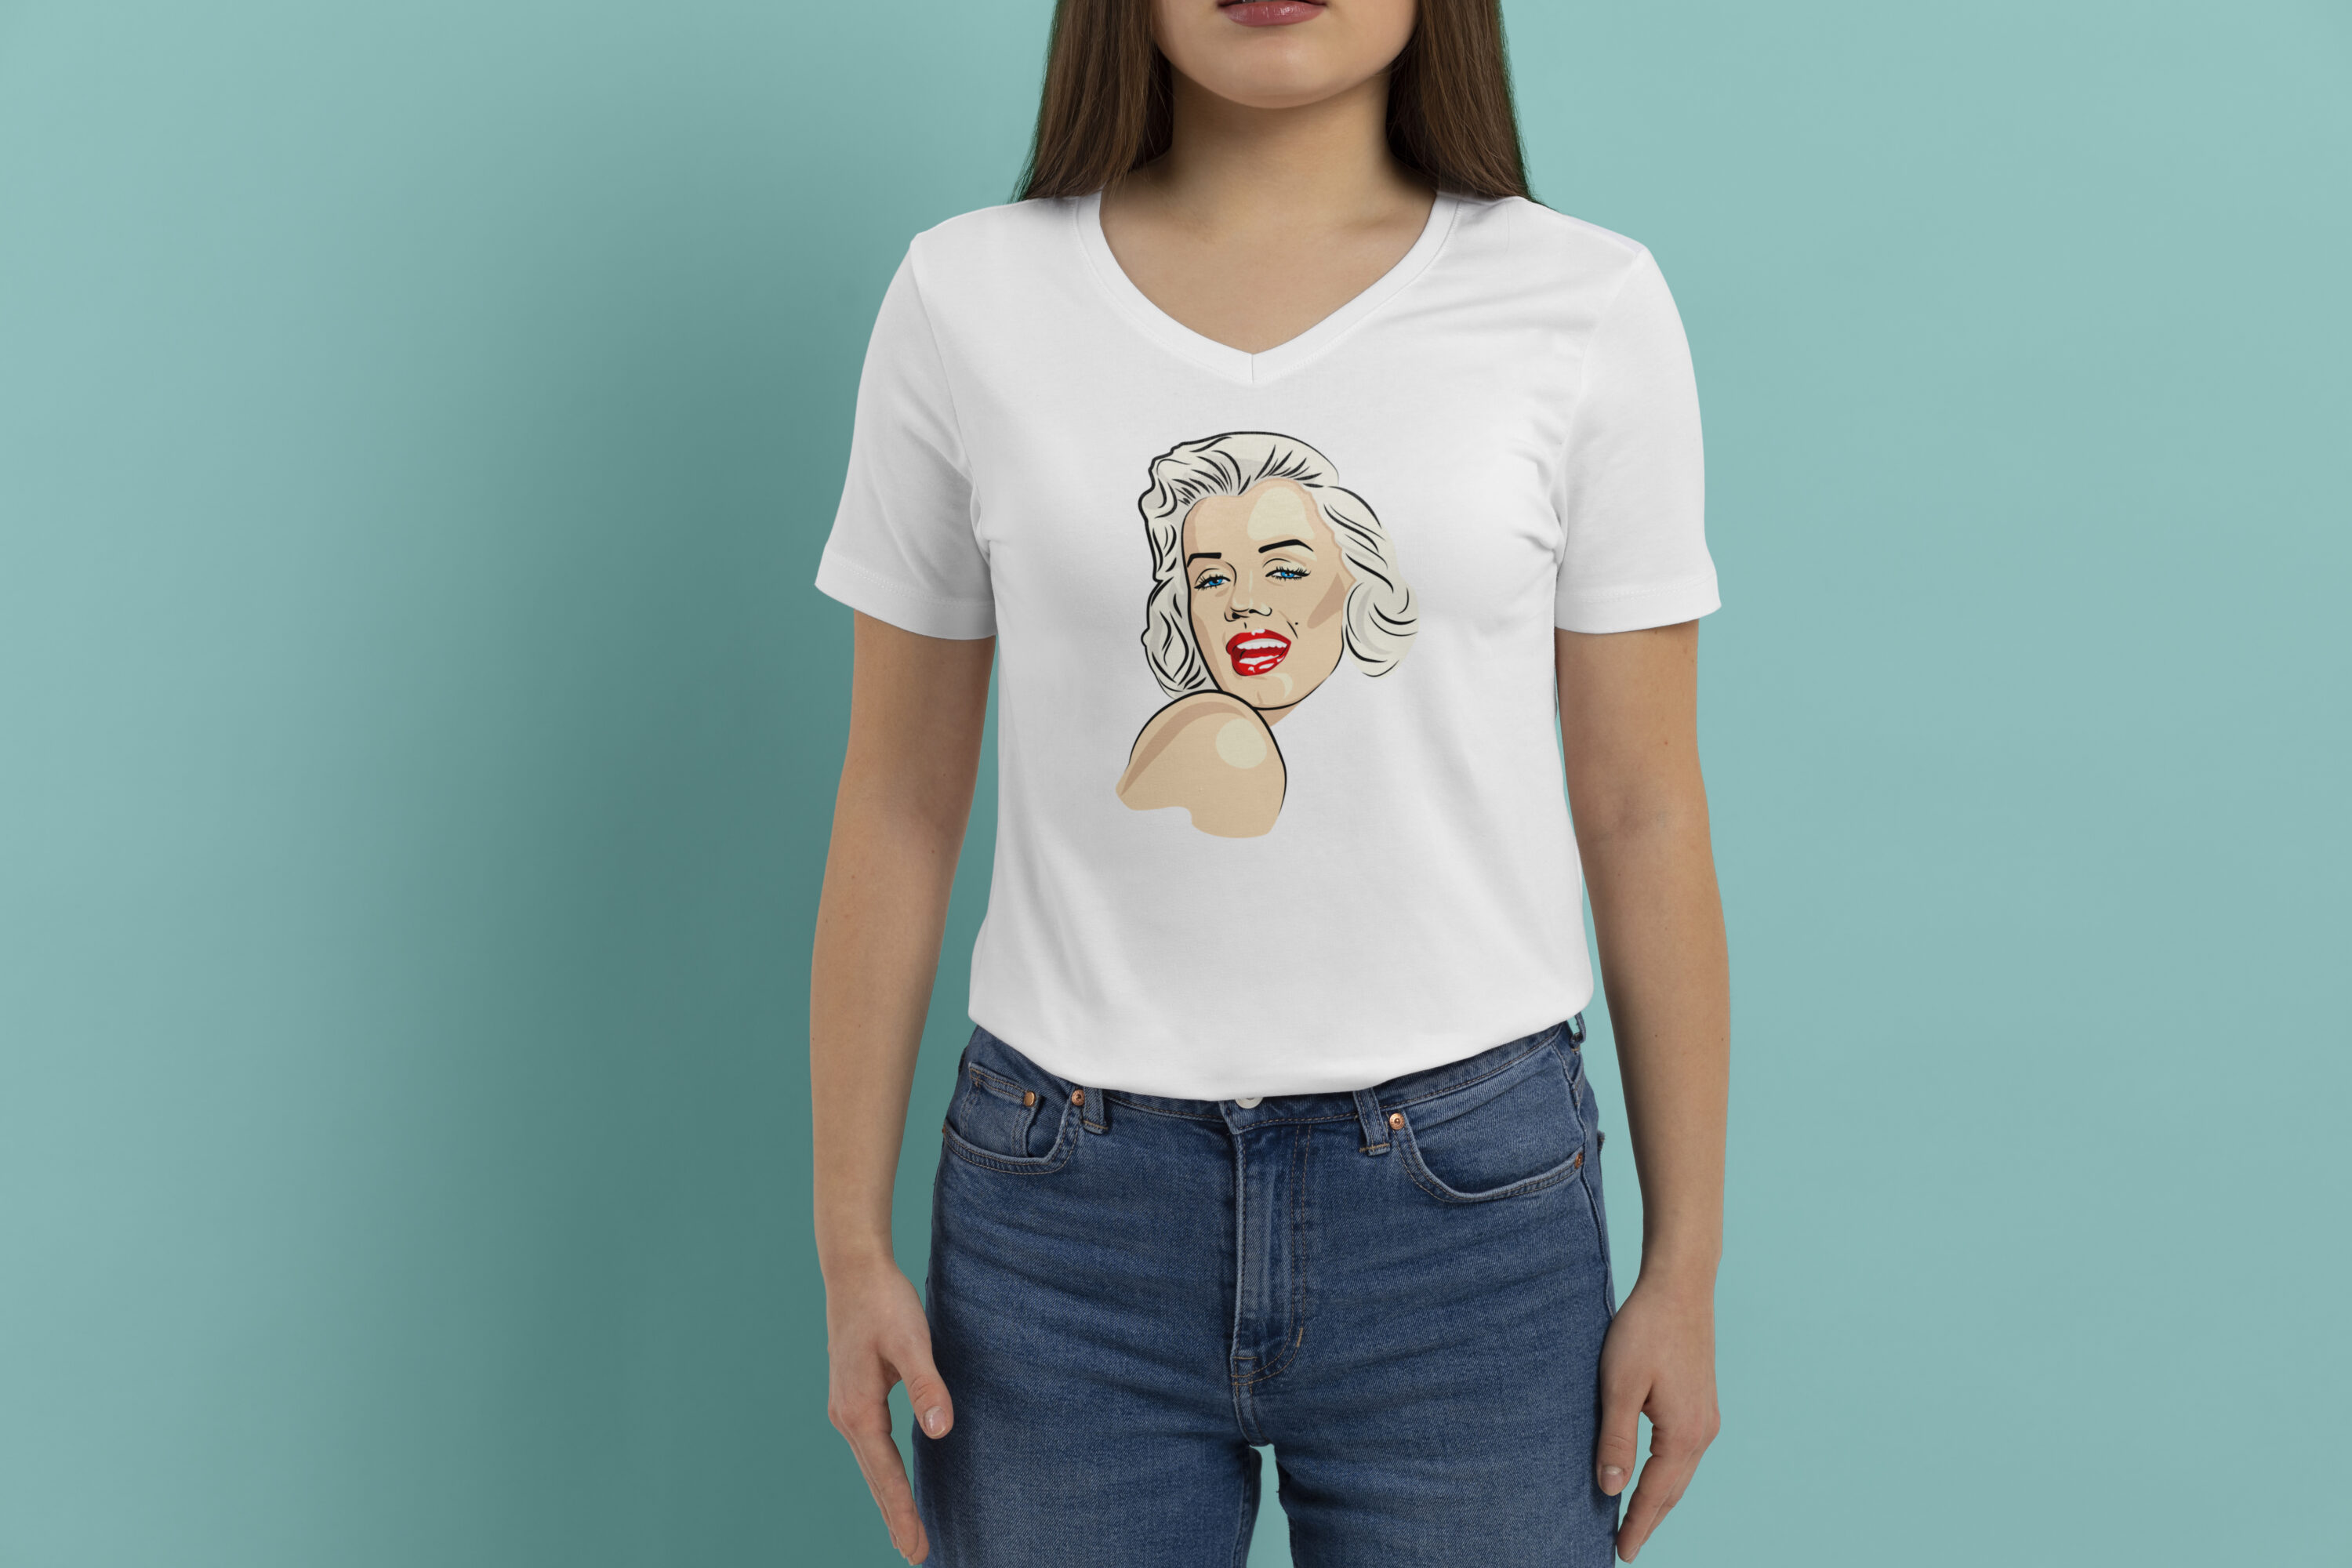 Image of a white t-shirt with a beautiful print of Marilyn Monroe.